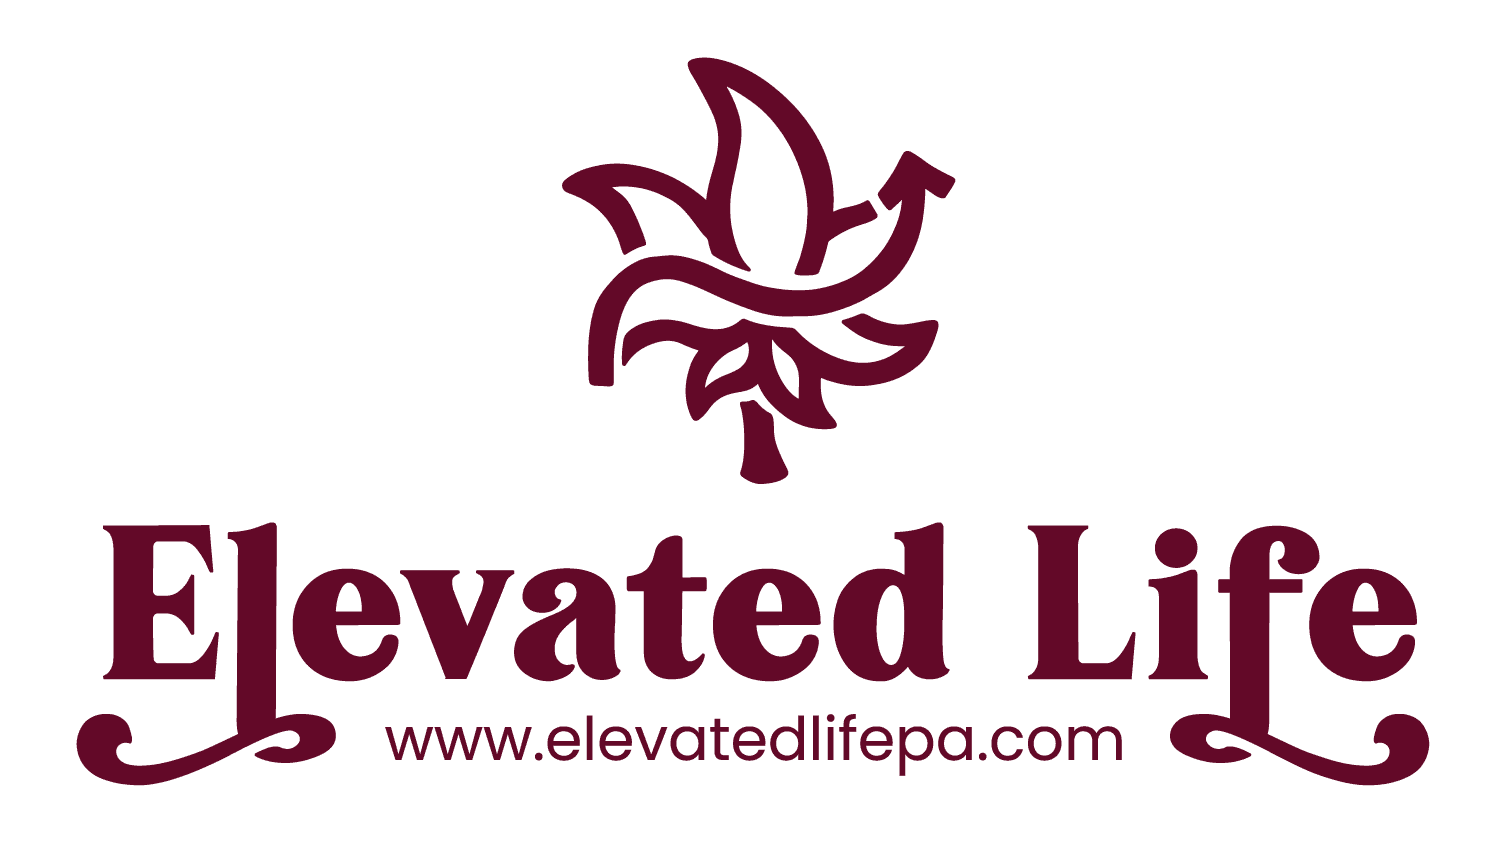 The Elevated Life logo.